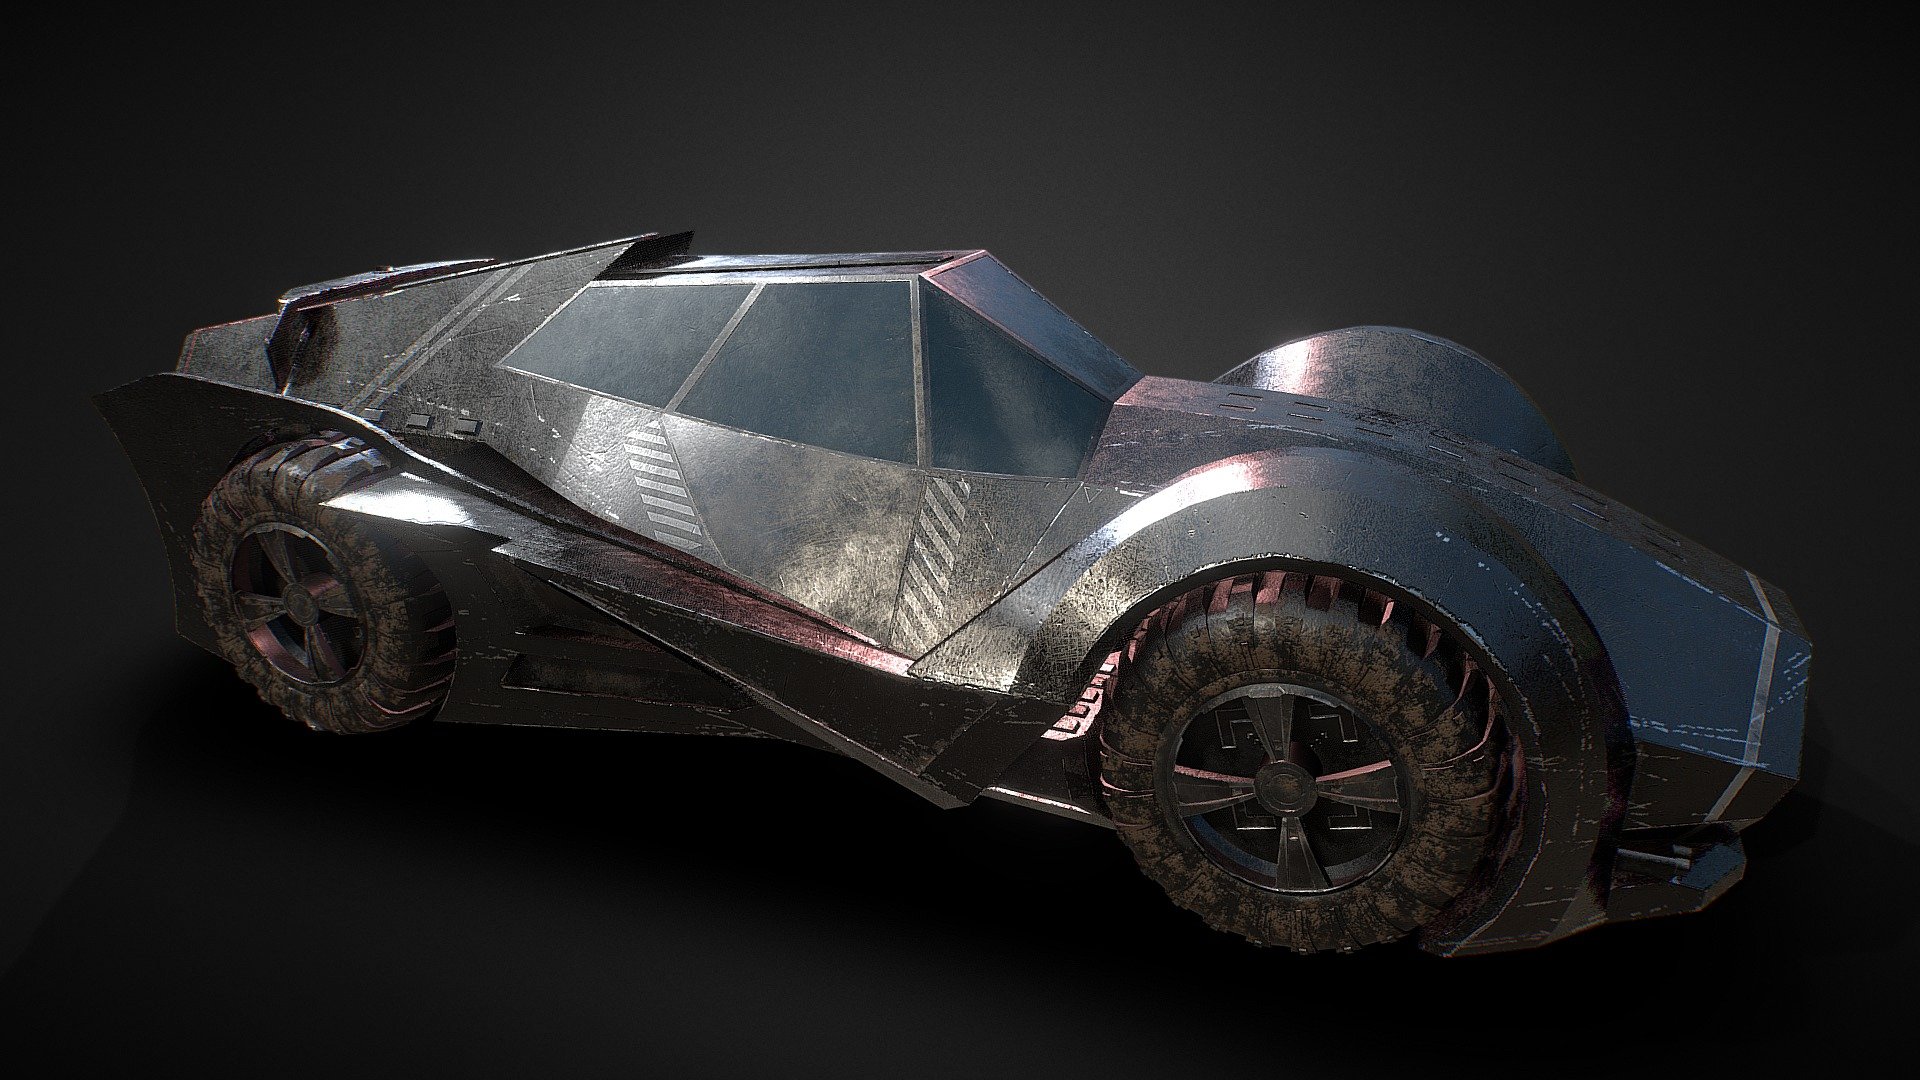 Render with the environment -https://www.artstation.com/artwork/2r13x Render with the environment 2 - https://www.artstation.com/artwork/X8dZD Render model - https://www.artstation.com/artwork/4LZBW - SCI FI Car - 3D model by Sagvo 3d model